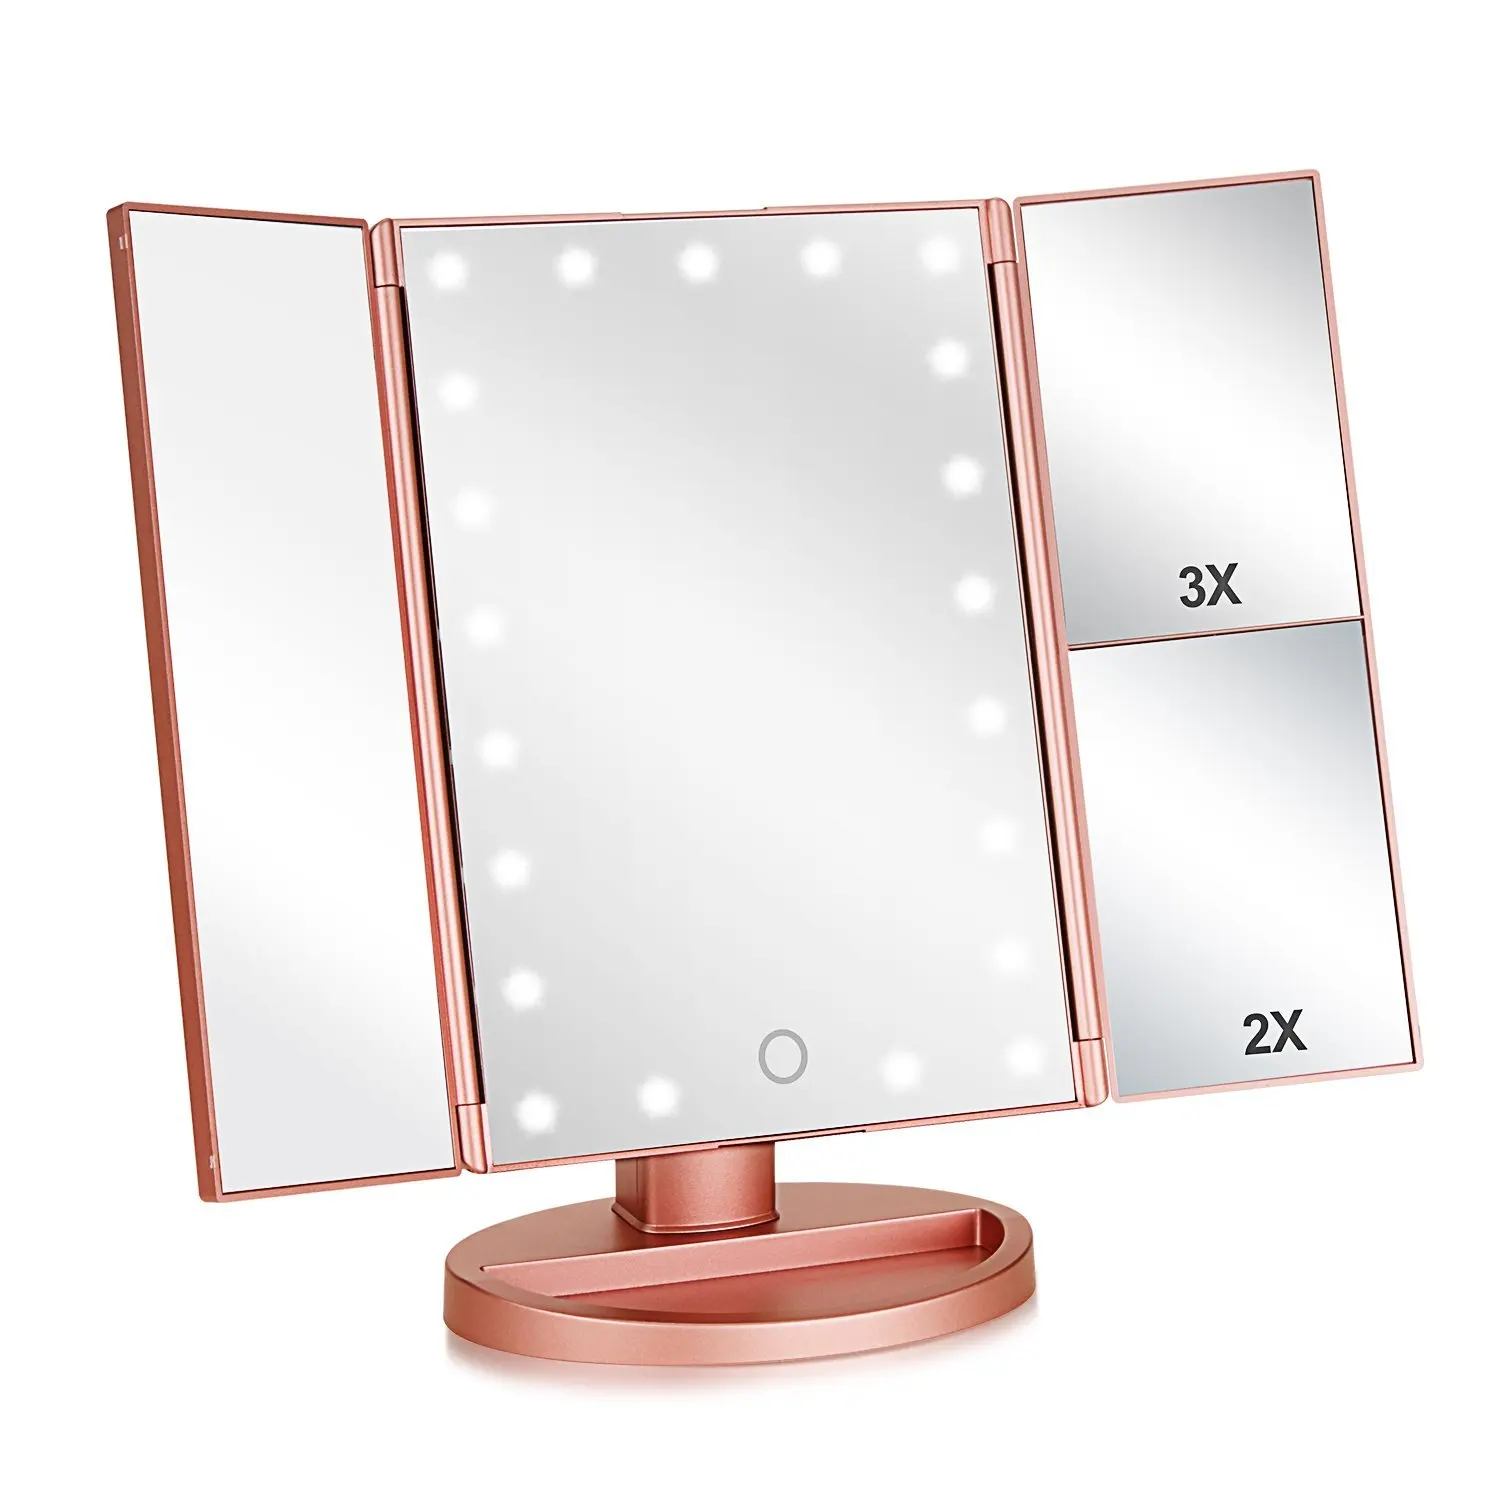 

Amazon Cosmetic LED Mirror Makeup Private label Top Sale Trifold Vanity Lighted USB Rechargeable Table Top Make Up Mirror, Customed